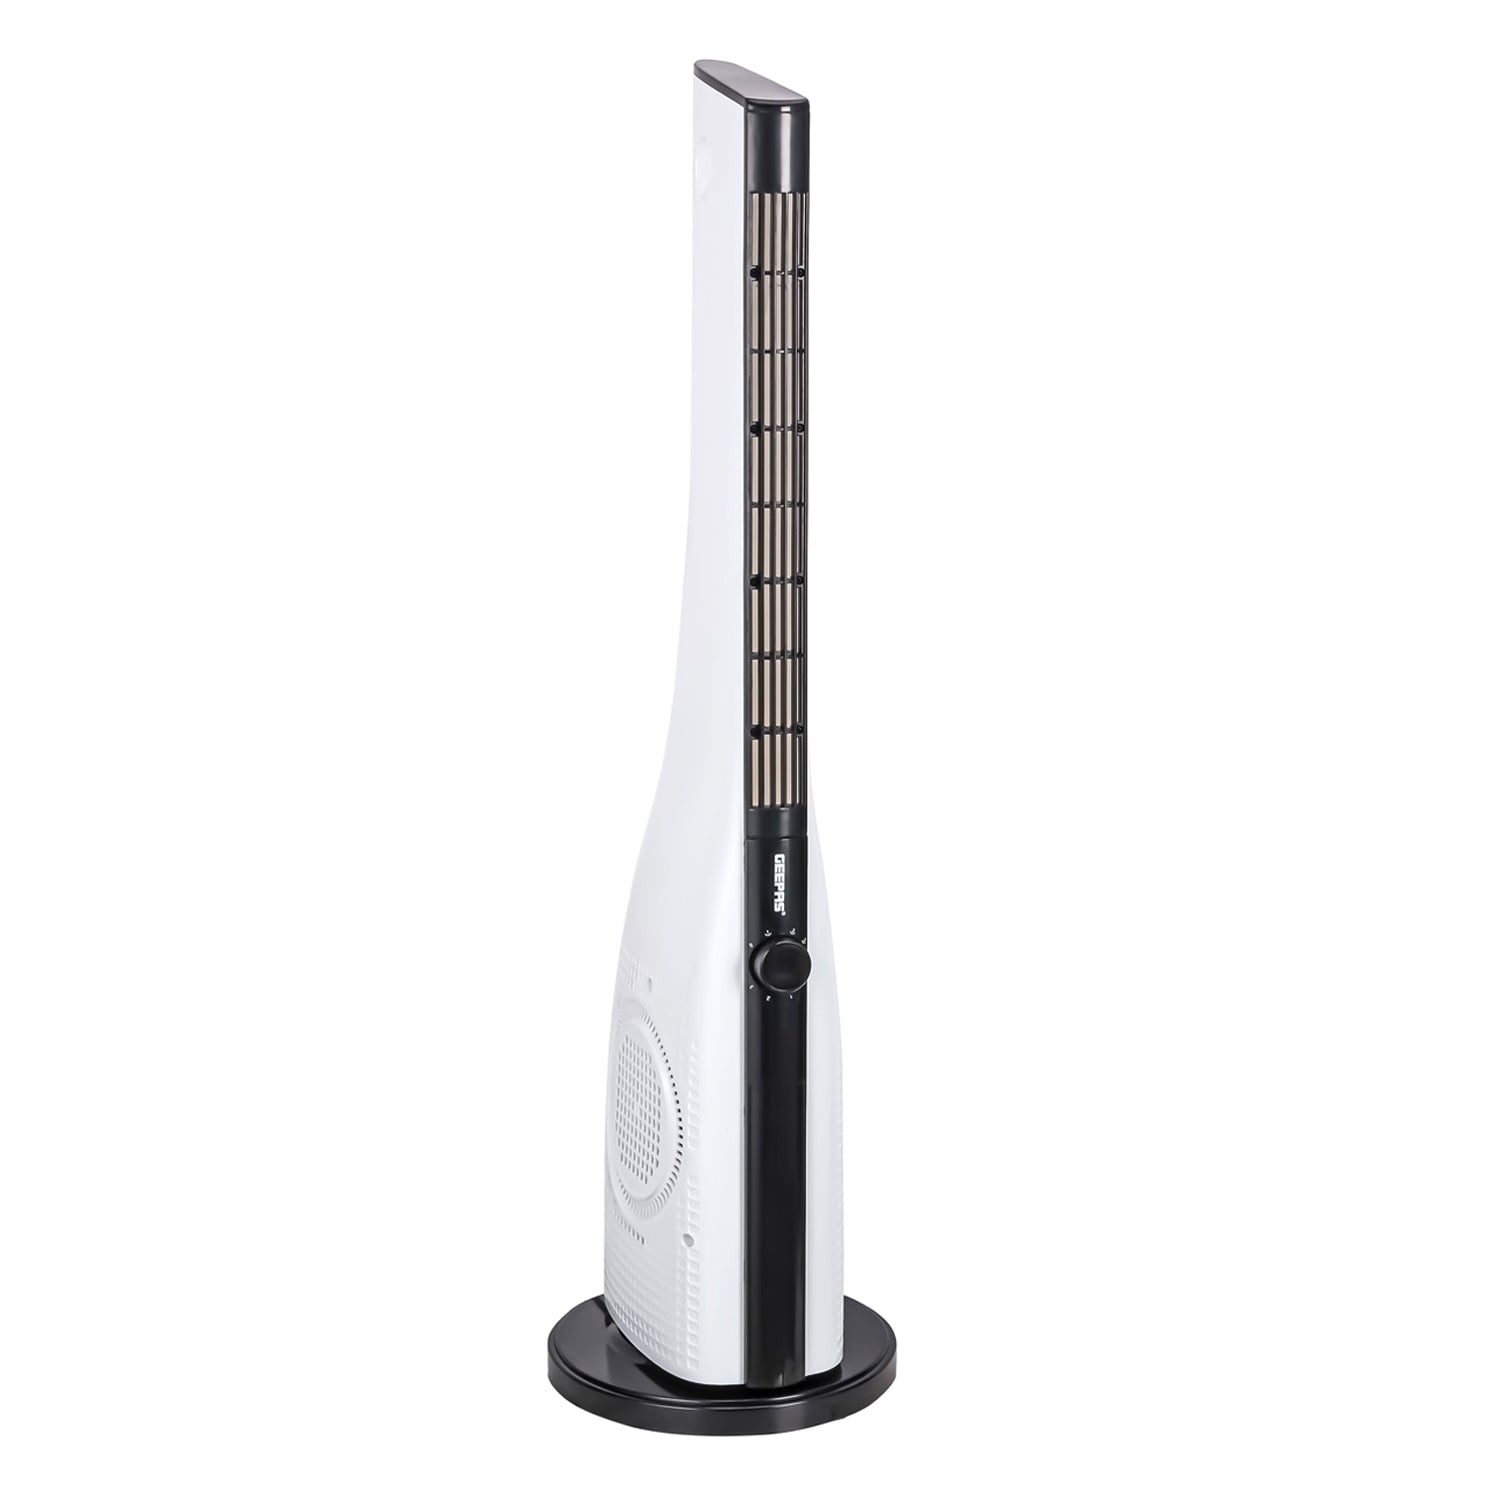 This image shows the bladeless white electric tower fan standing against a plain white background.